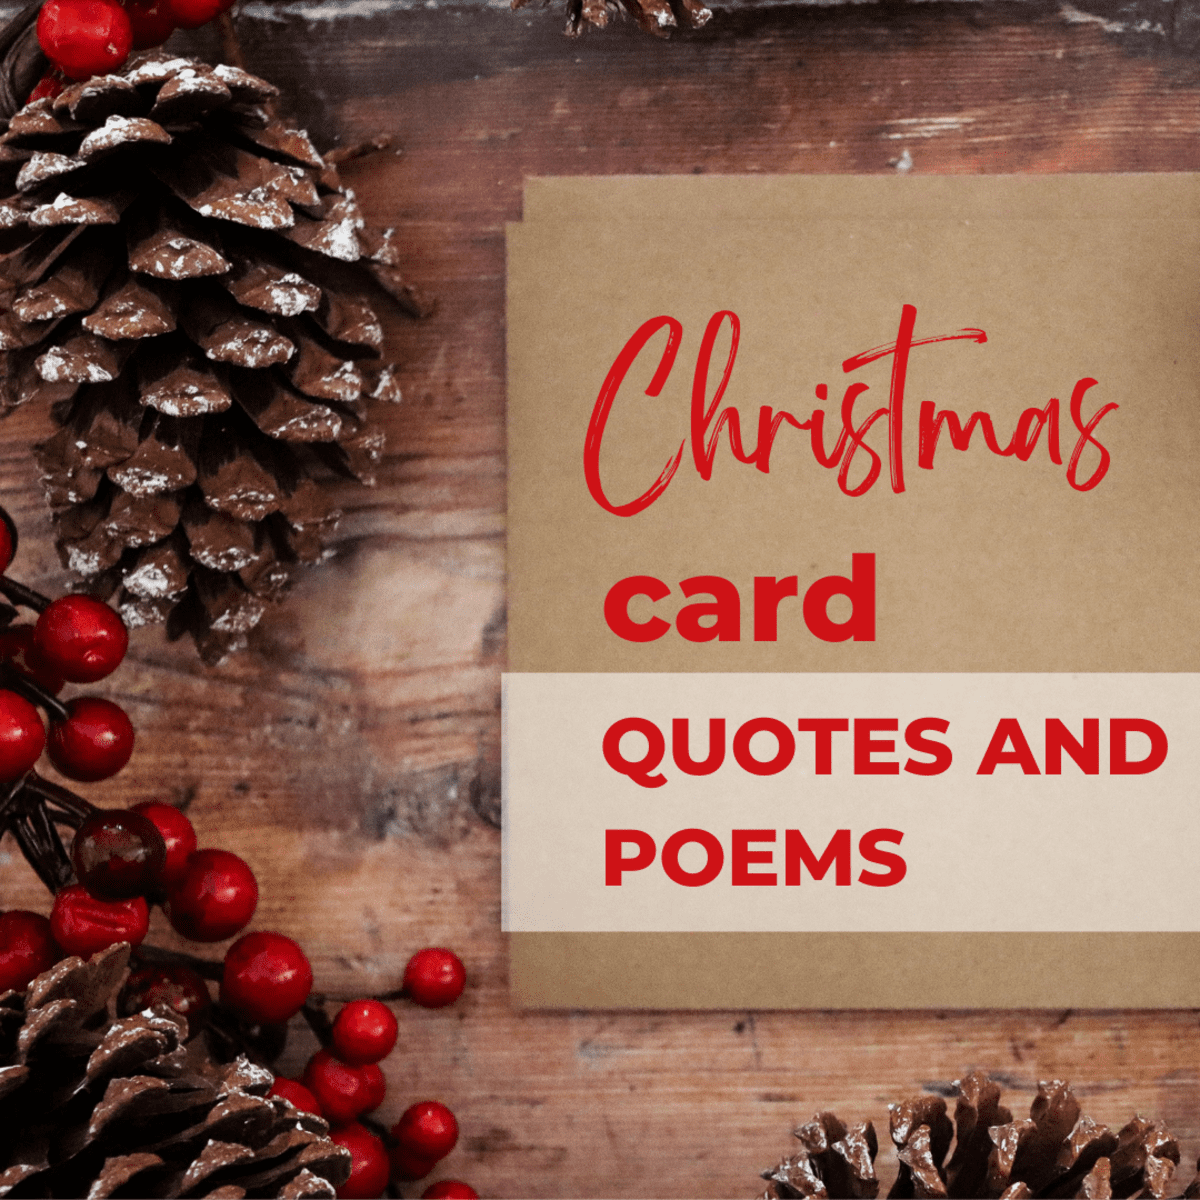 Christmas Poems, Verses, and One-Liners to Write in a Card - Holidappy